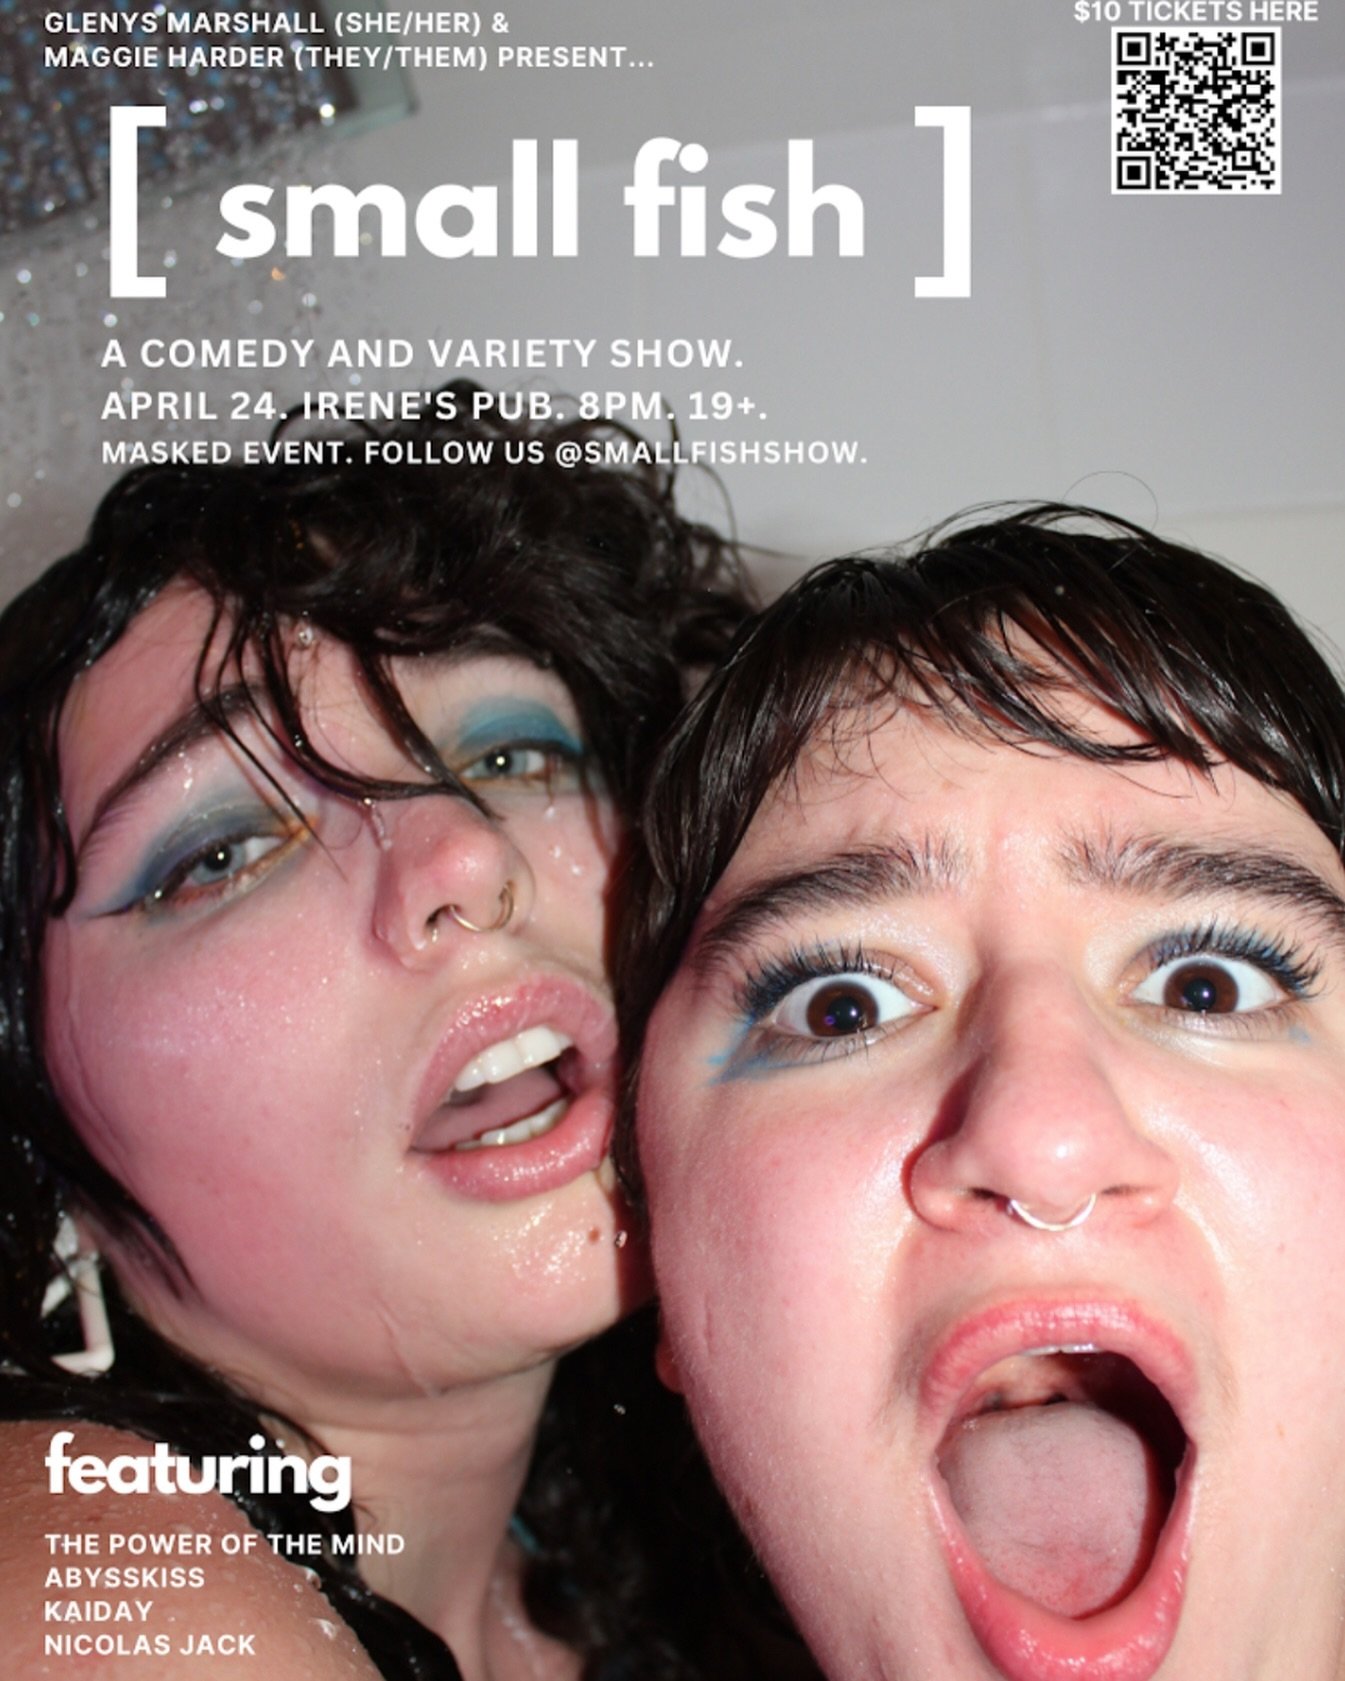 Just a handful of tickets left for Wednesday&rsquo;s Small Fish Show !! Follow the link in bio !
#smallfish #livemusic #comedy #drag #improv #irenespub @smallfishshow